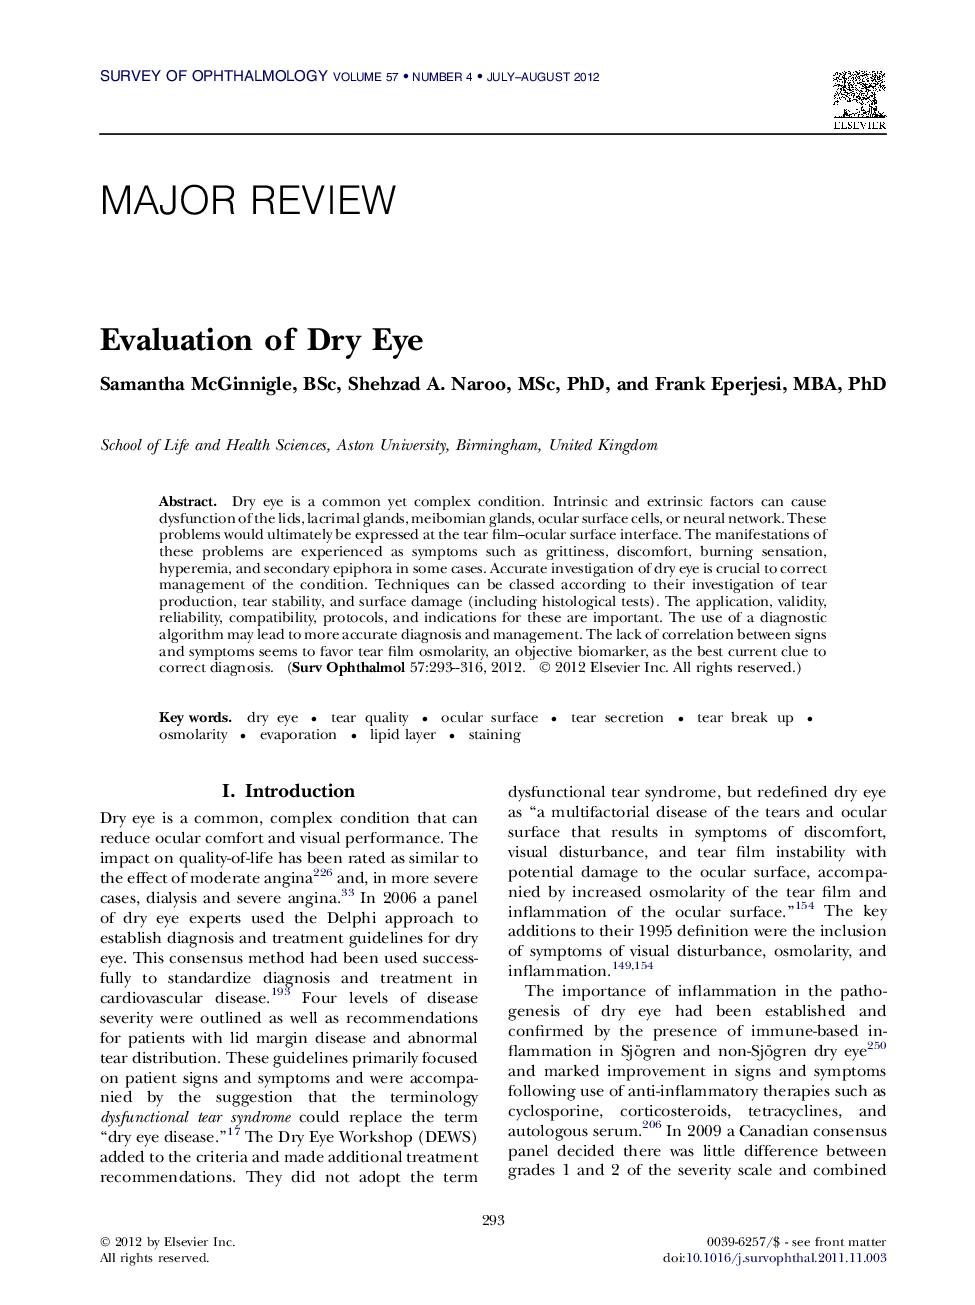 Evaluation of Dry Eye